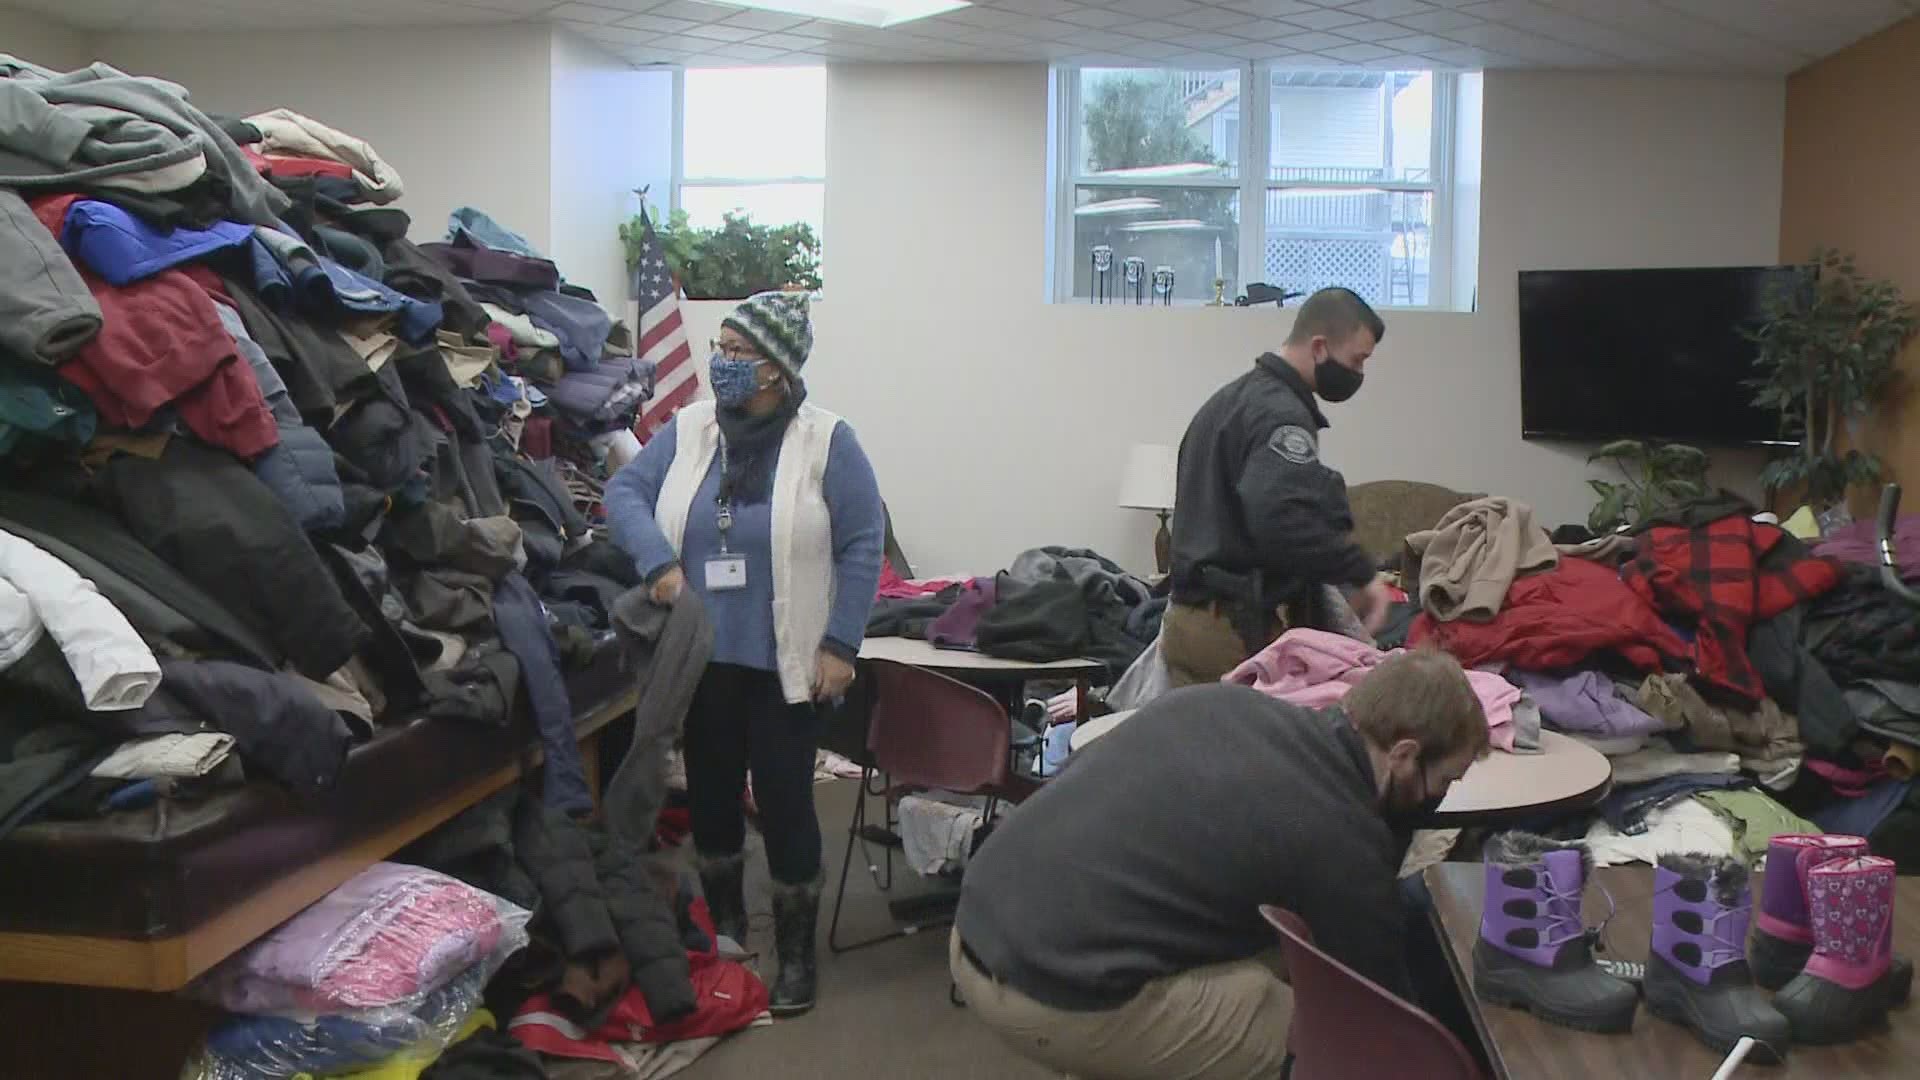 The Biddeford Police Department and United Way of York County partnered for winter coat drive.